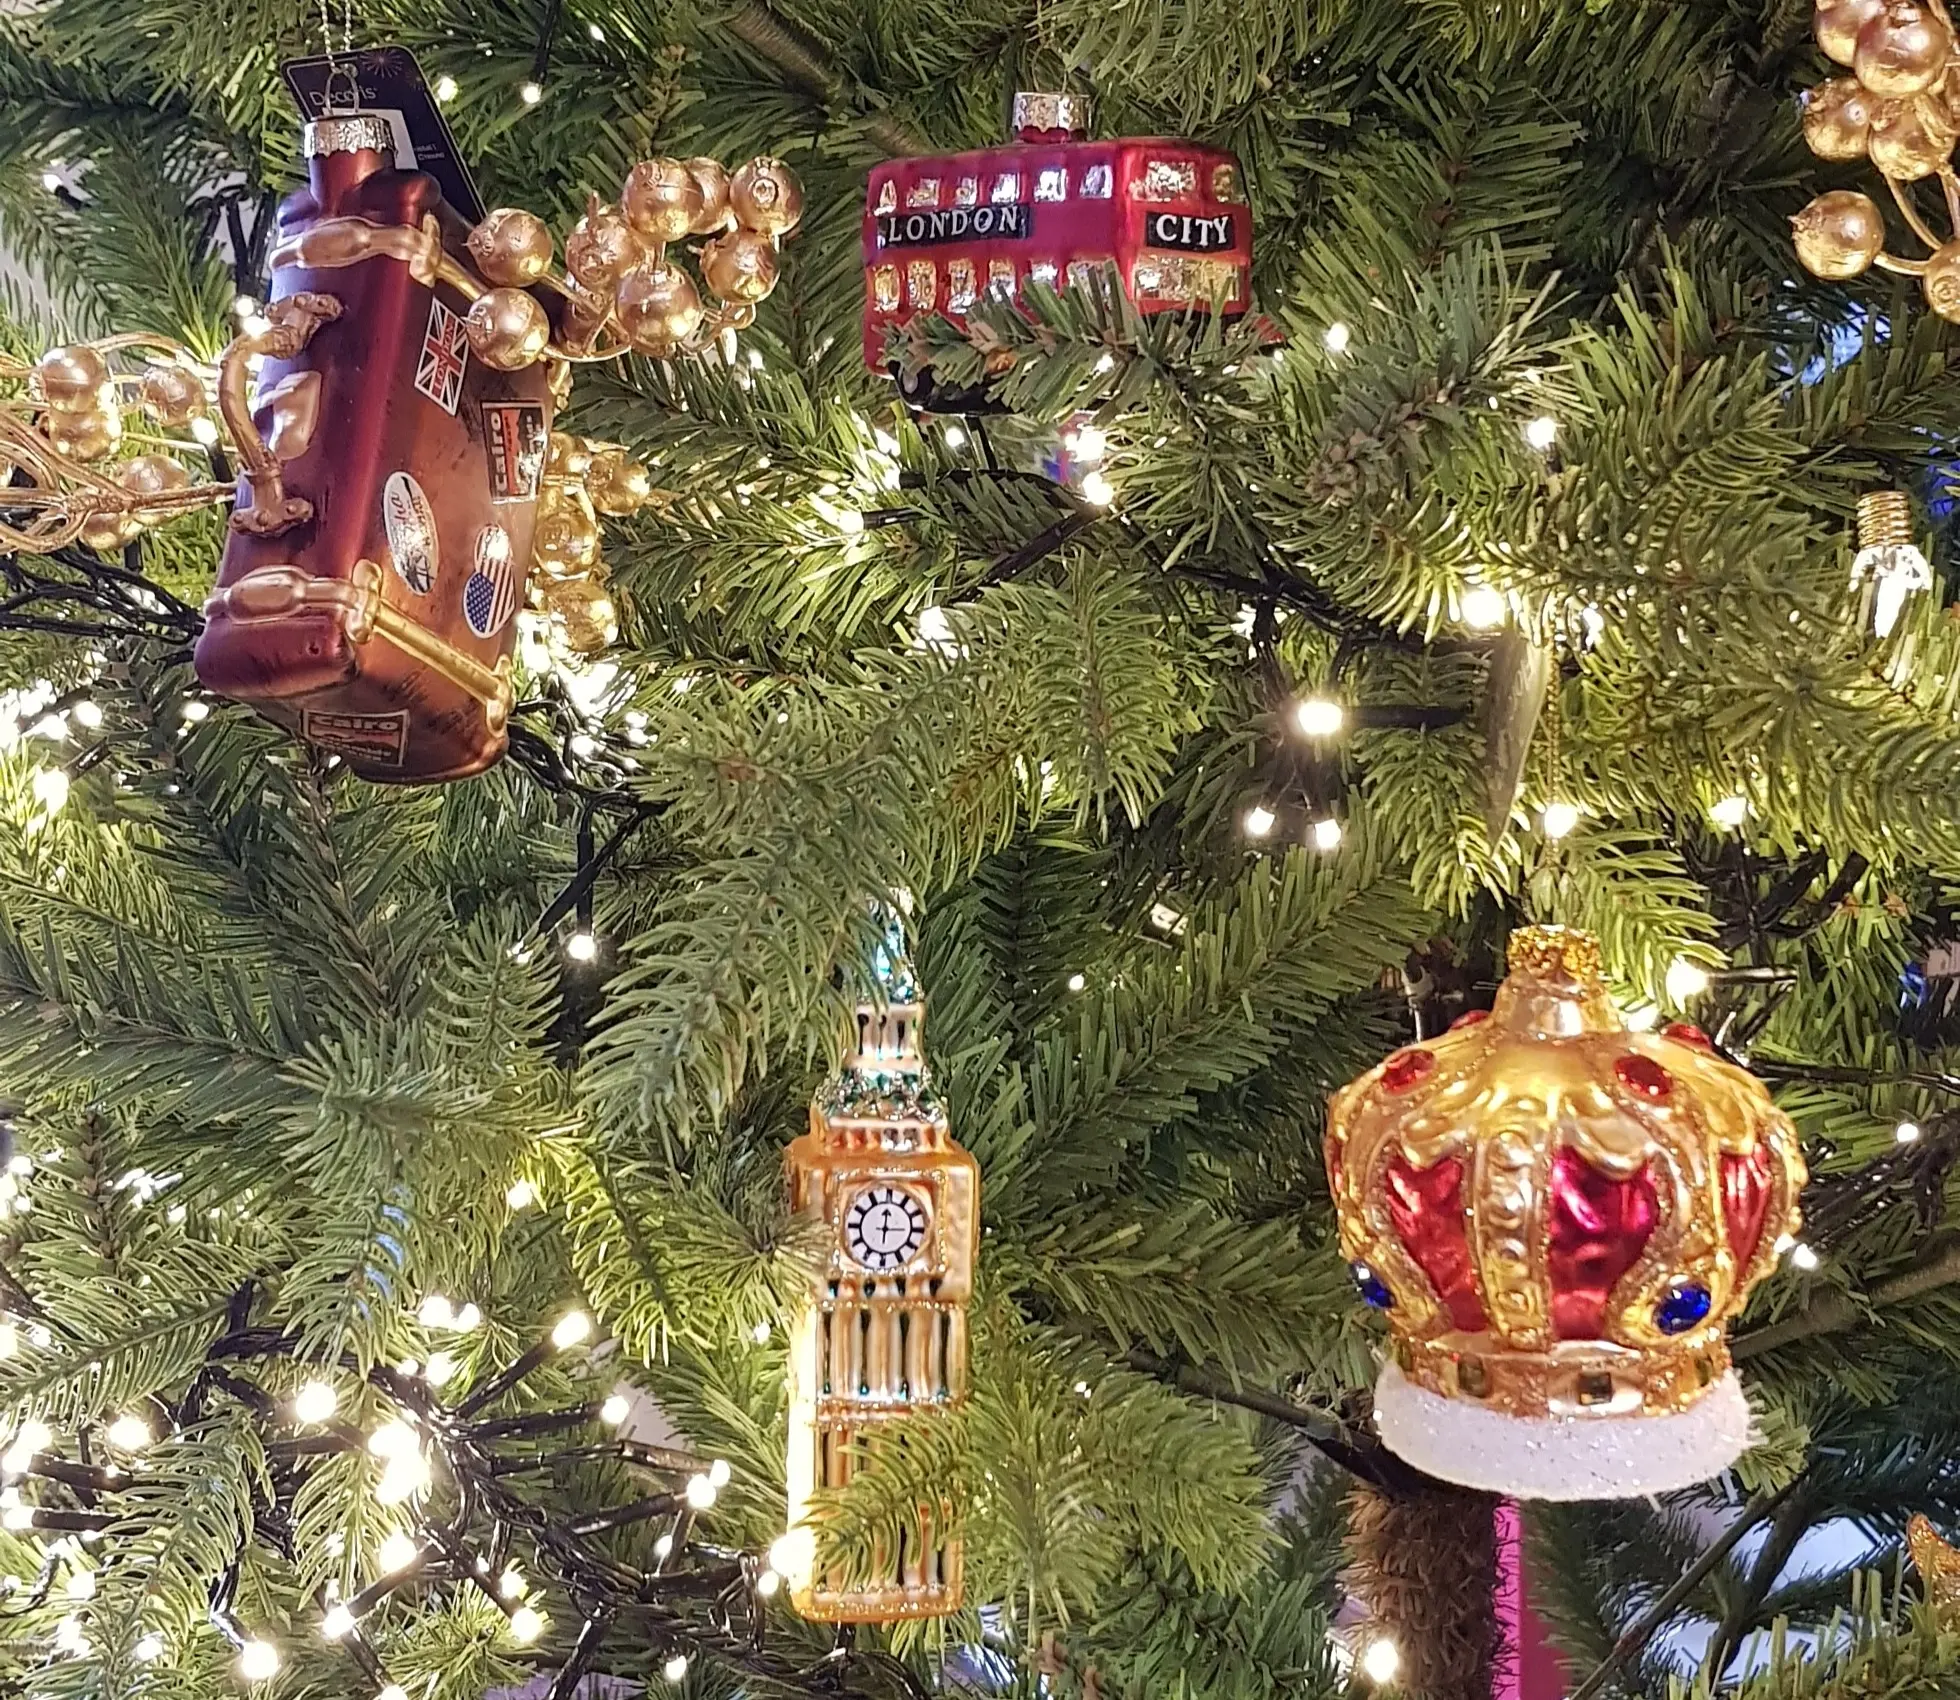 Best of British Themed Christmas Tree Decorations